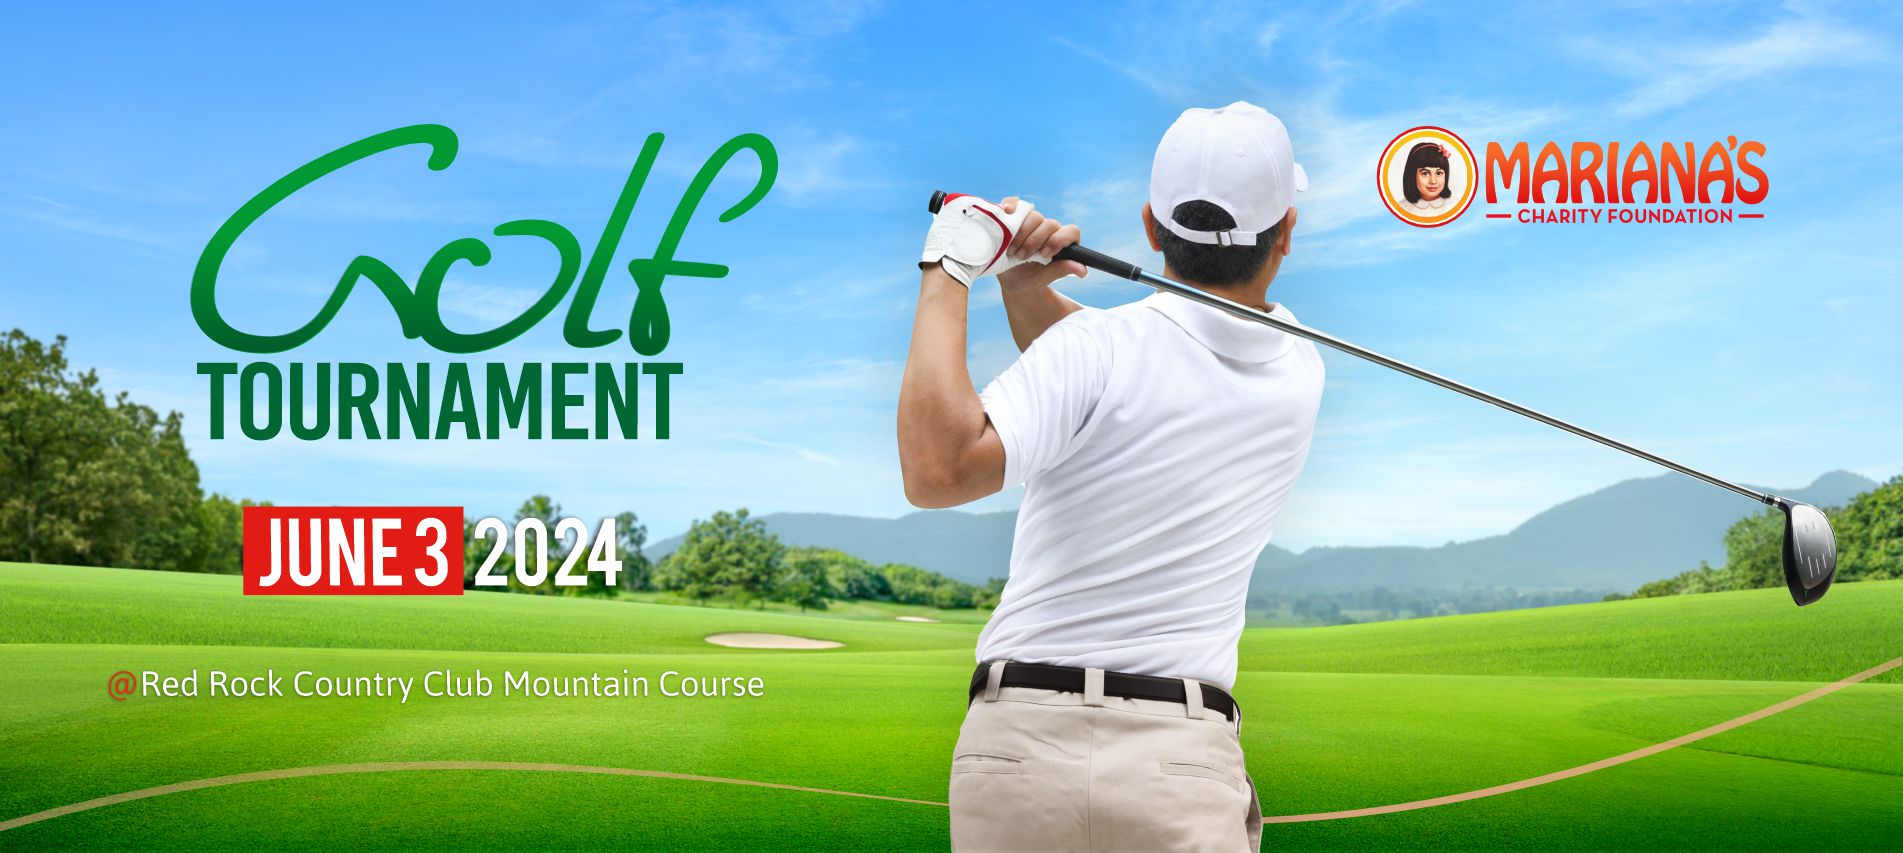 Marianas Golf Tournament June 3th 2024 Red Rock Country Club Mountain Course